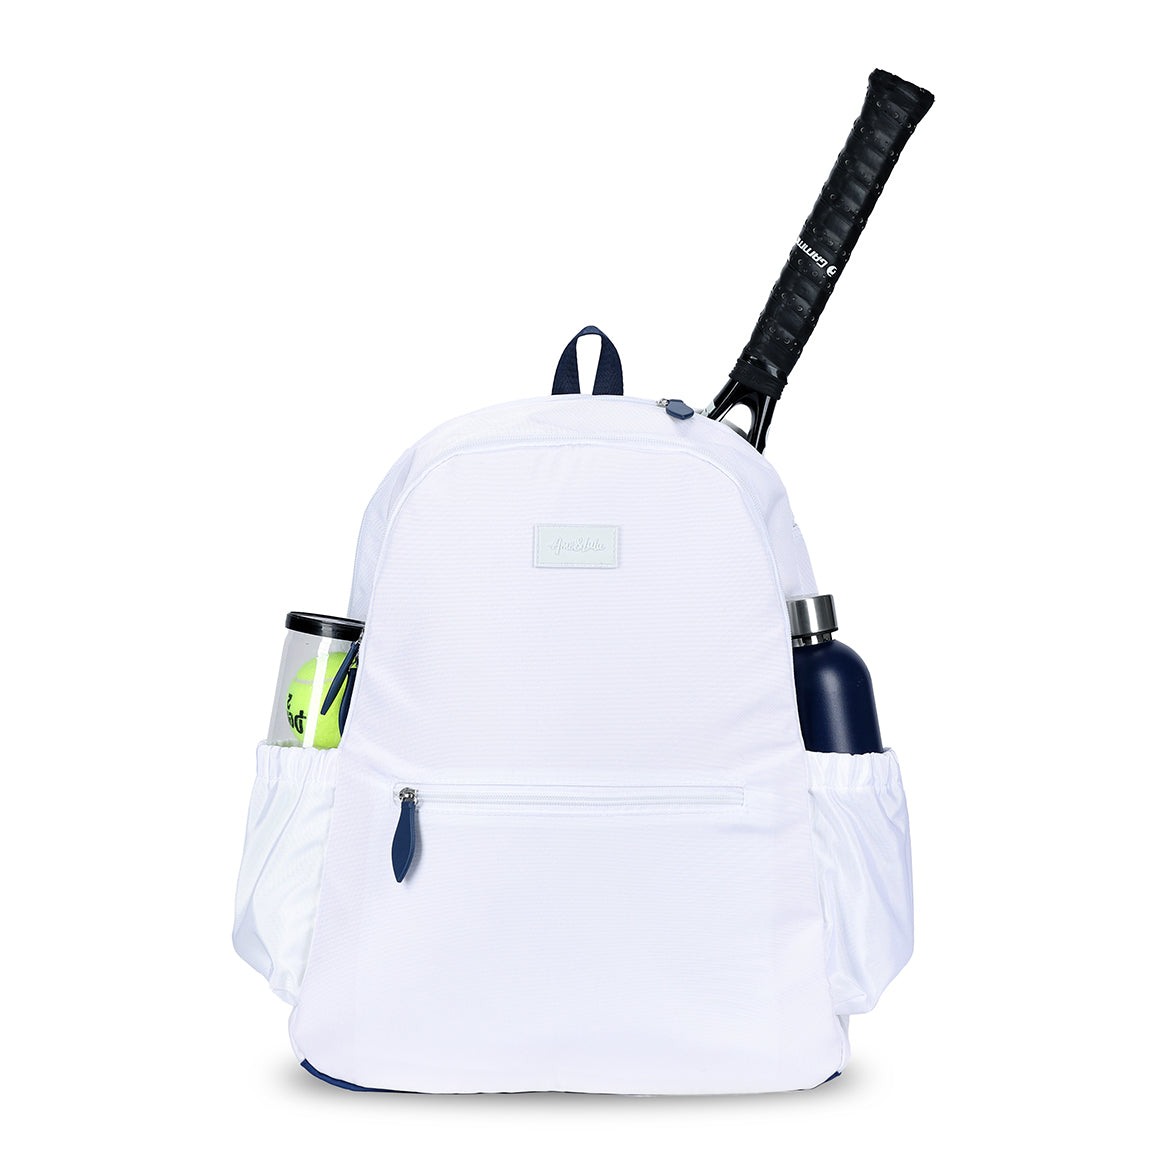 Front view of white tennis courtside backpack with racquet in pocket inside backpack. Side pockets hold water bottle and tennis balls.